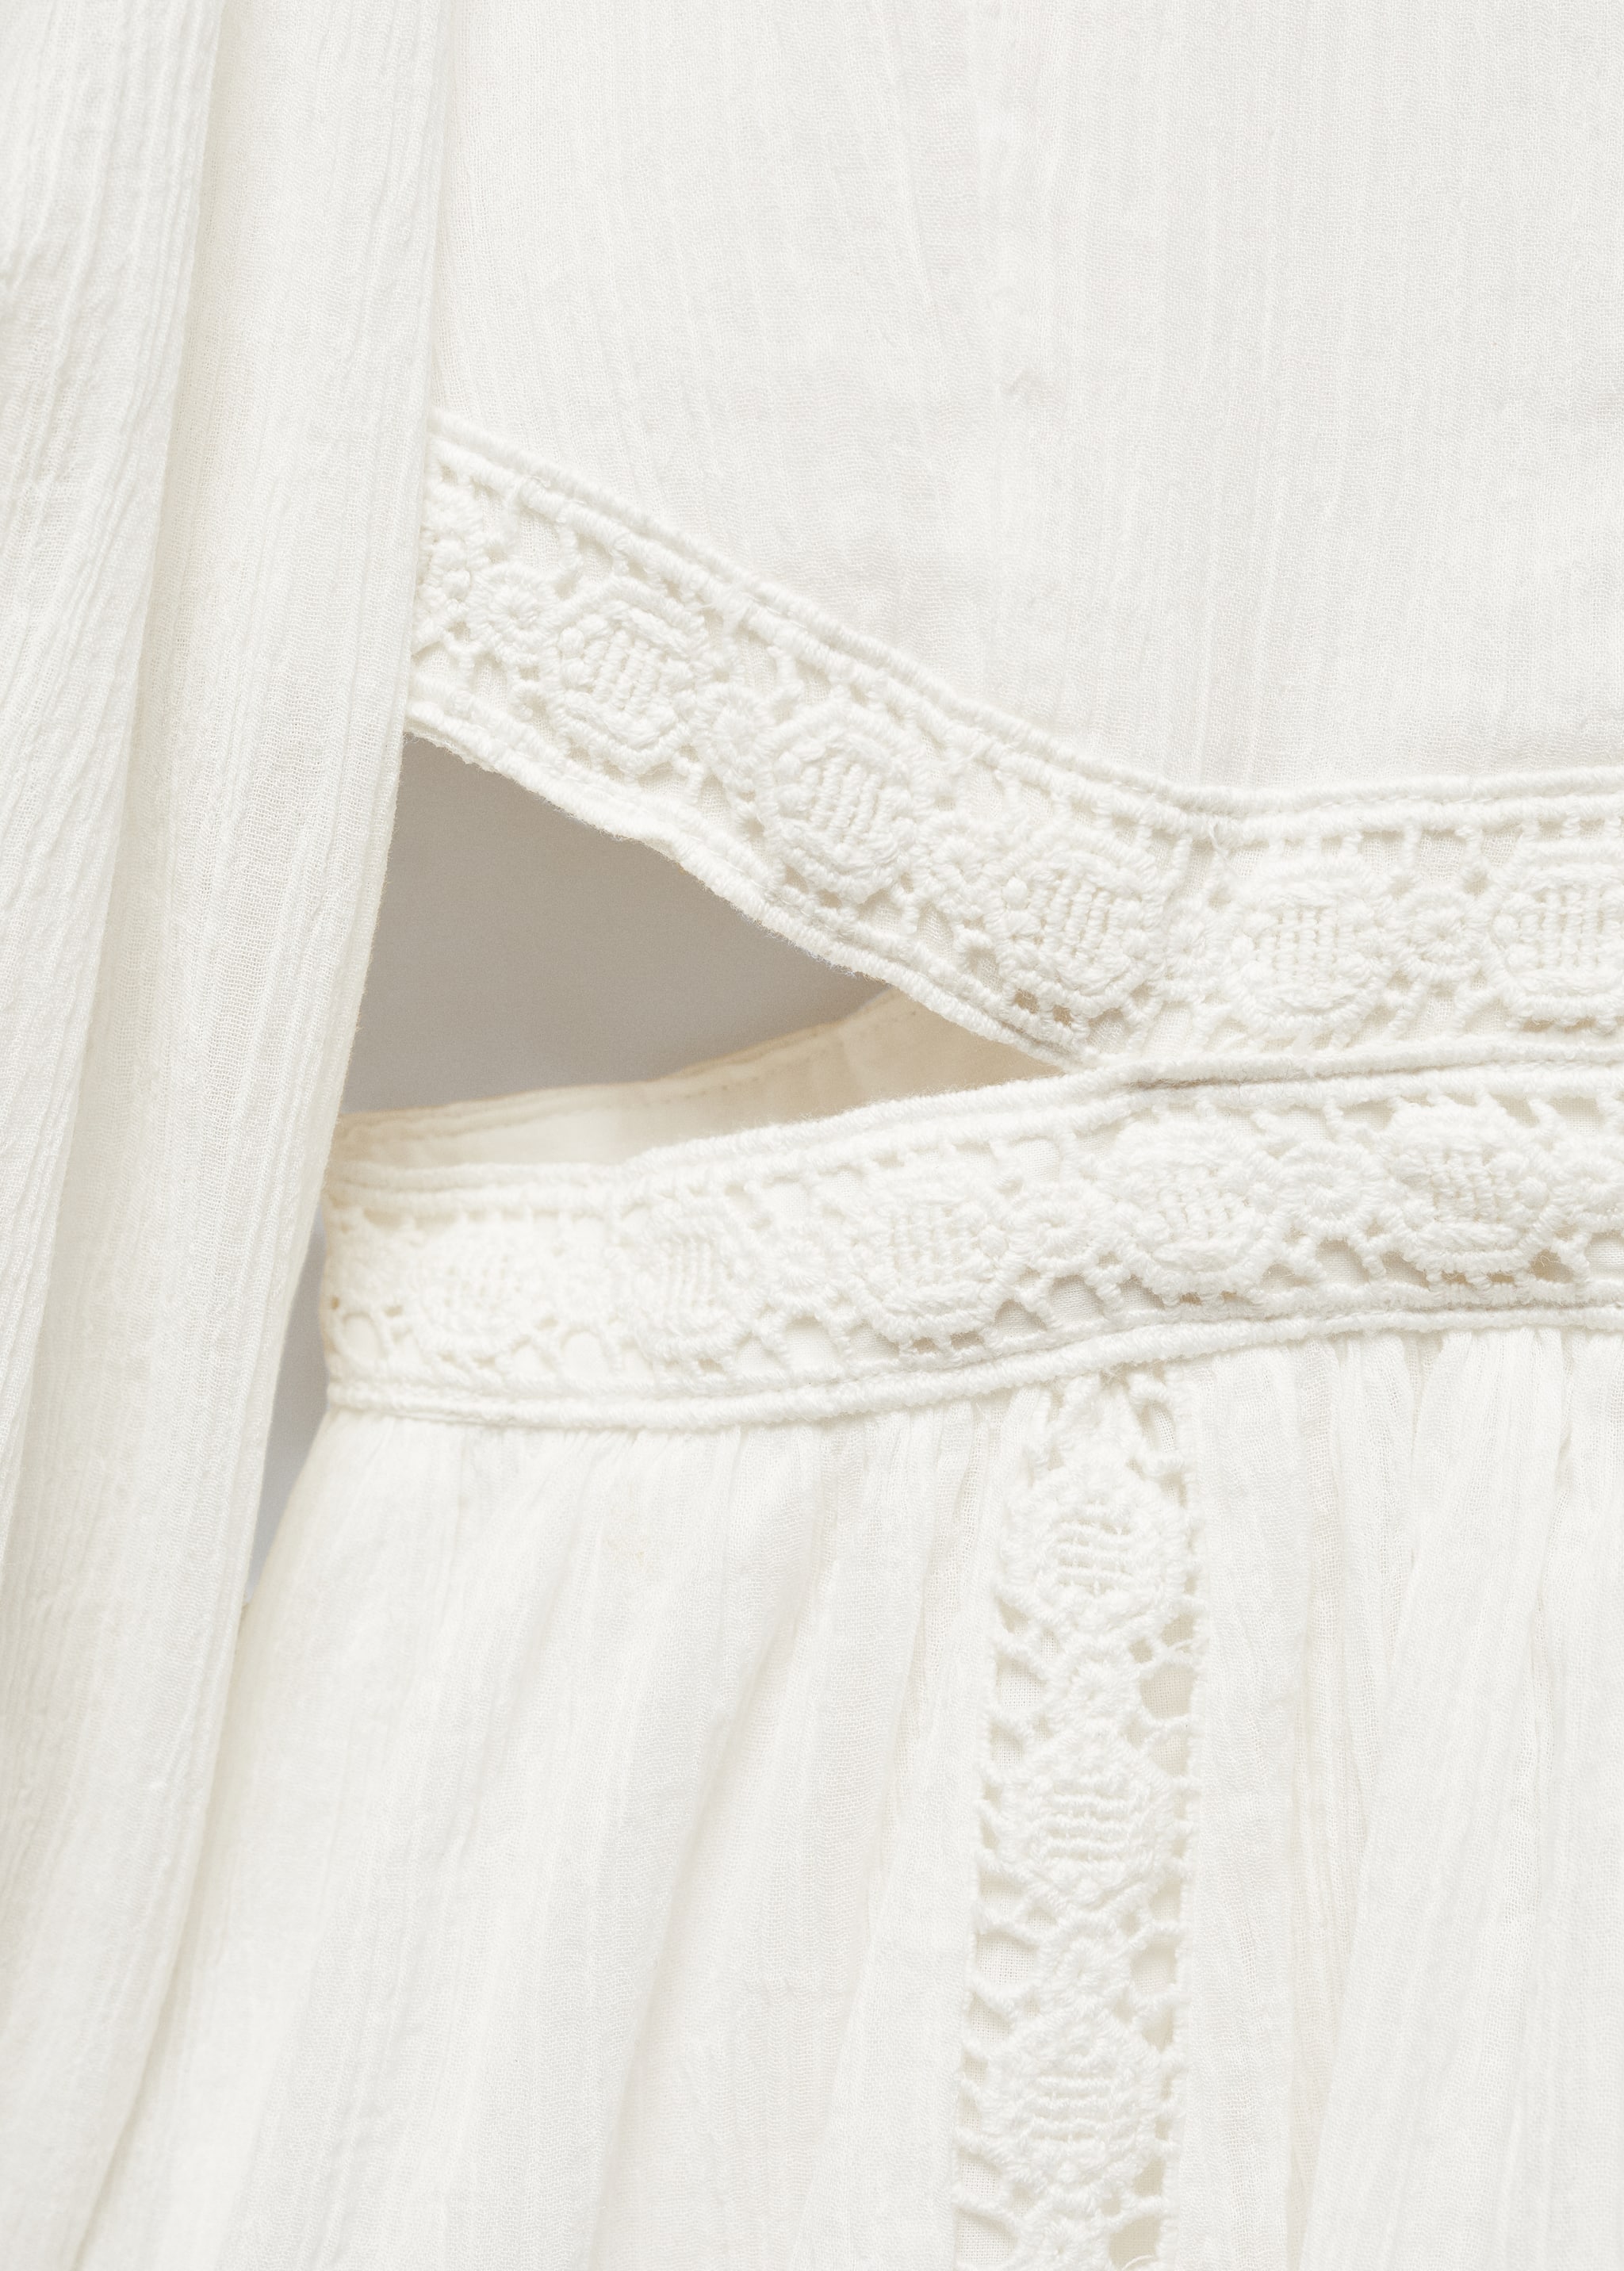 Slit dress with lace detail - Details of the article 8